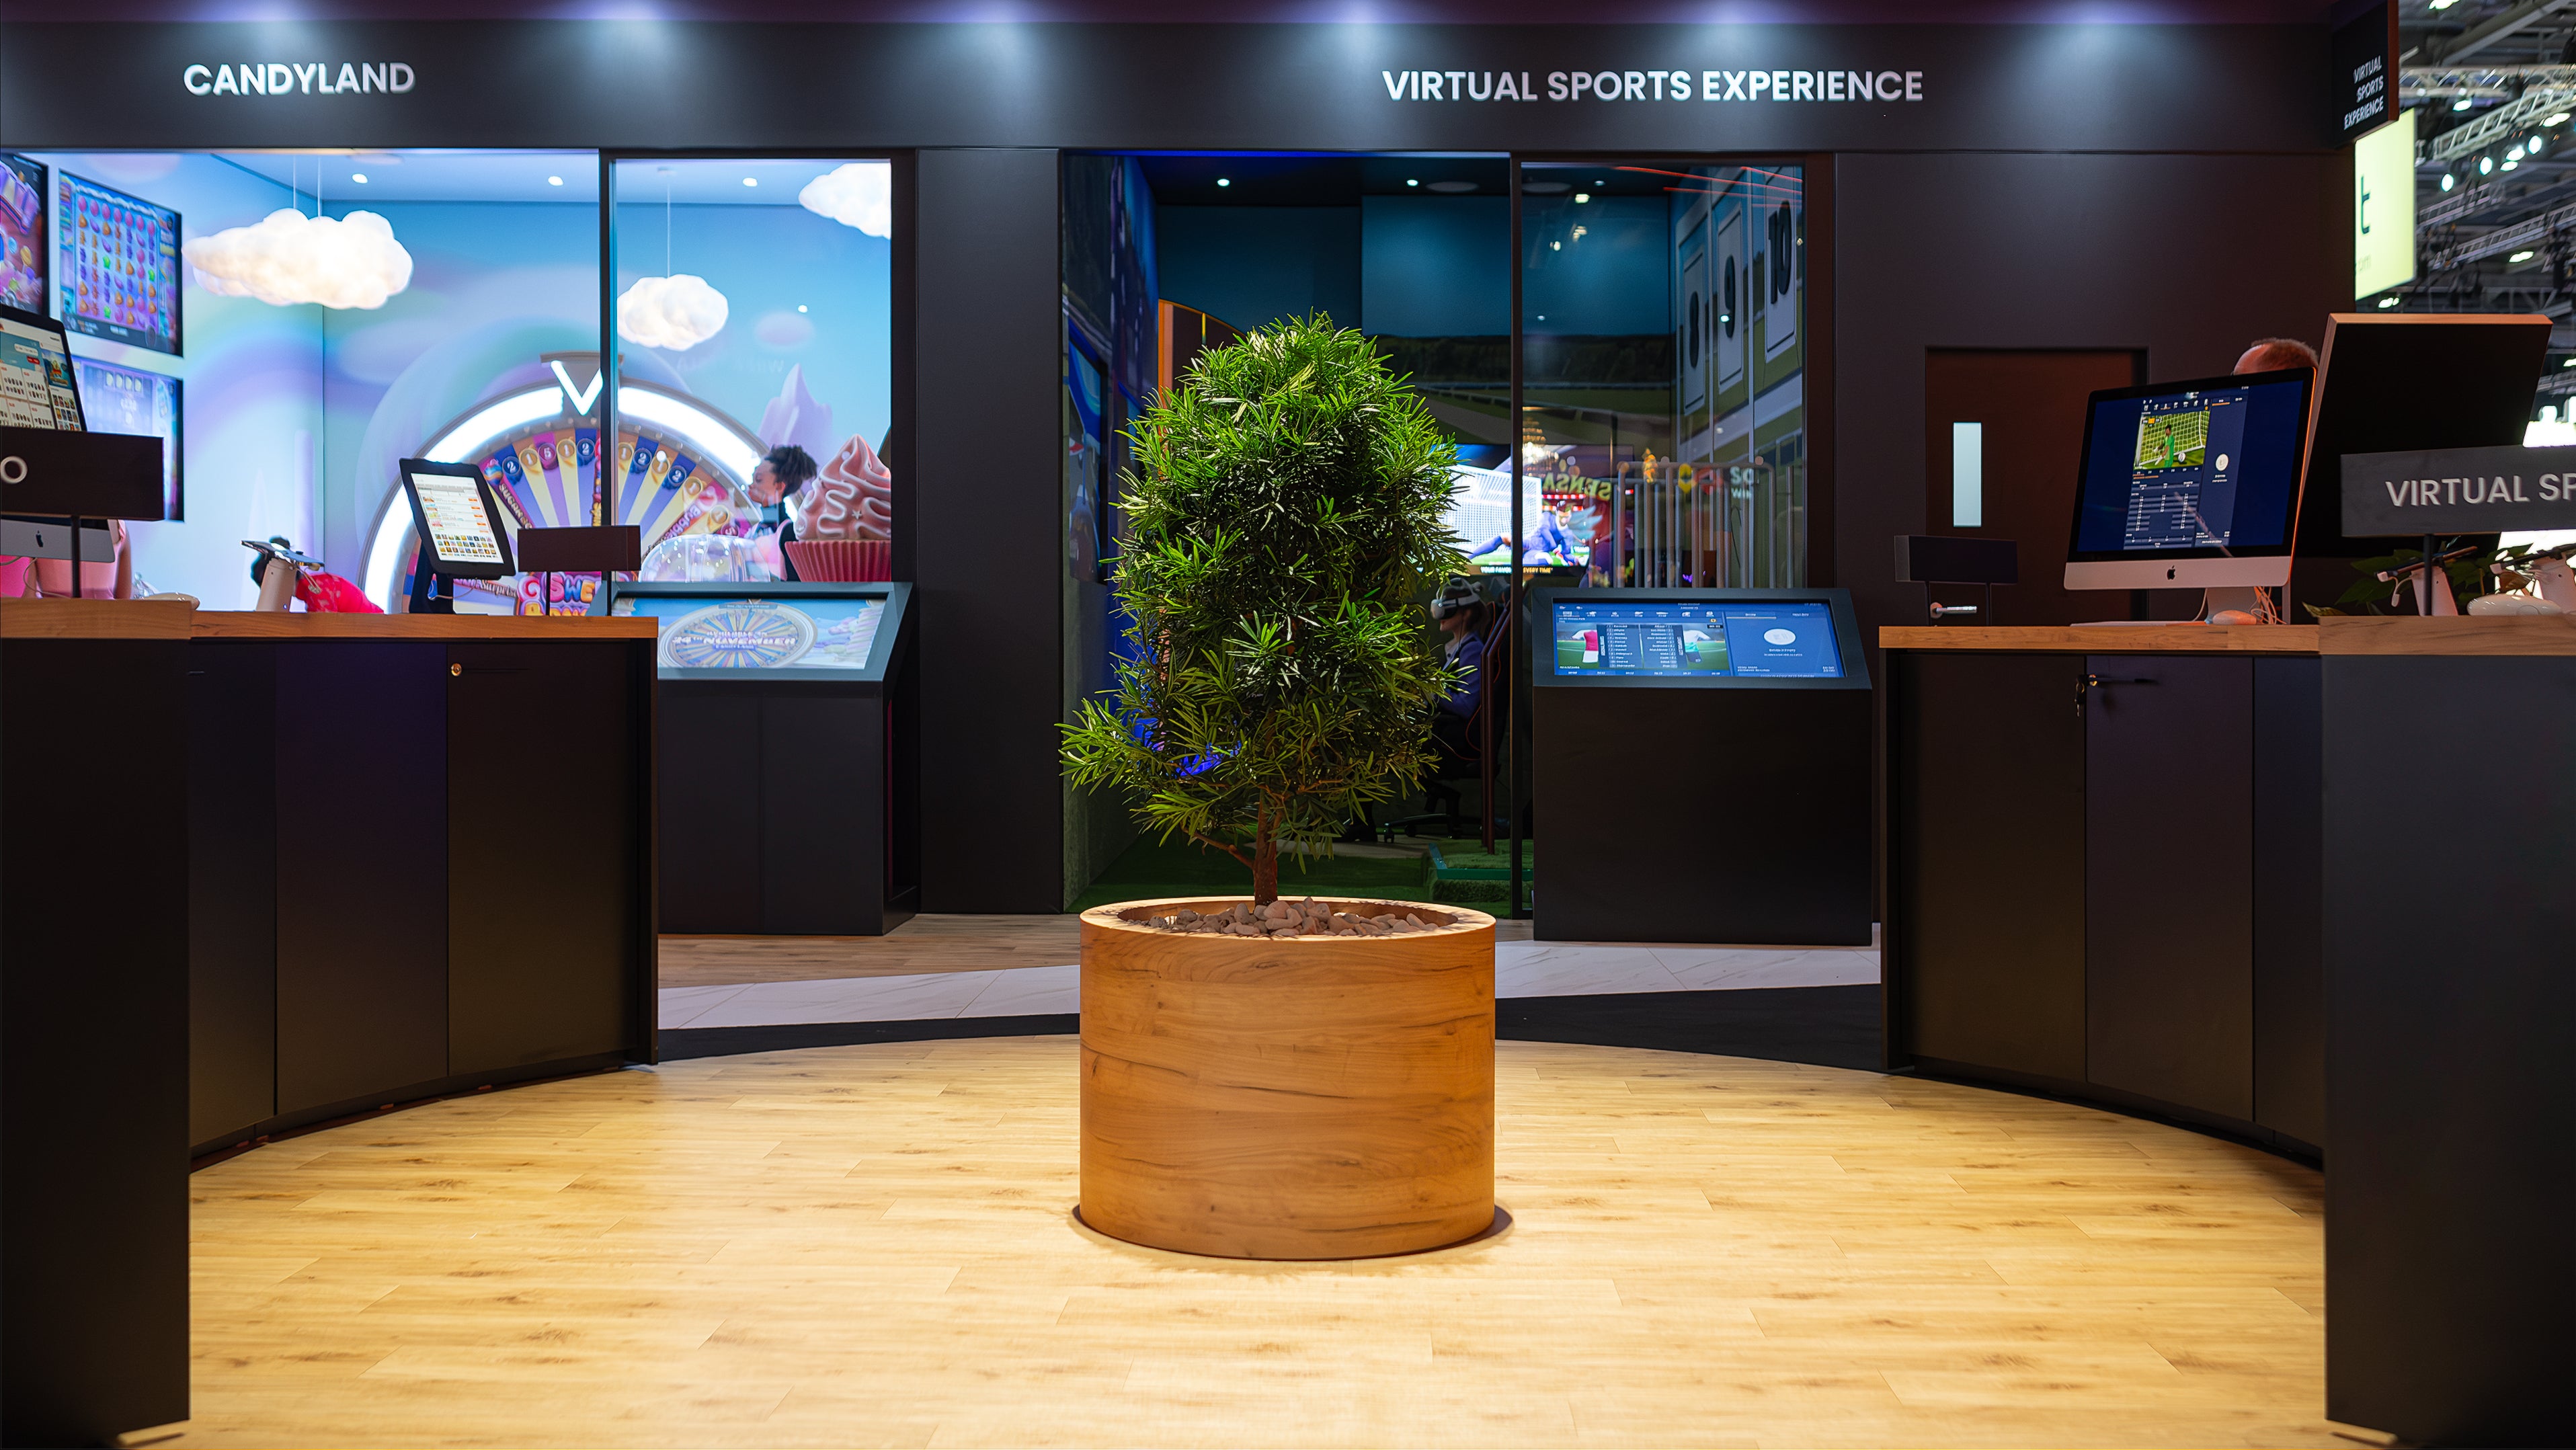 We proposed this robust, sculpted evergreen tree in a large wooden planter to provide a natural accent within the engaging Virtual Sports Experience zone at the ICE London Exhibition, bridging the gap between the digital and natural elements.